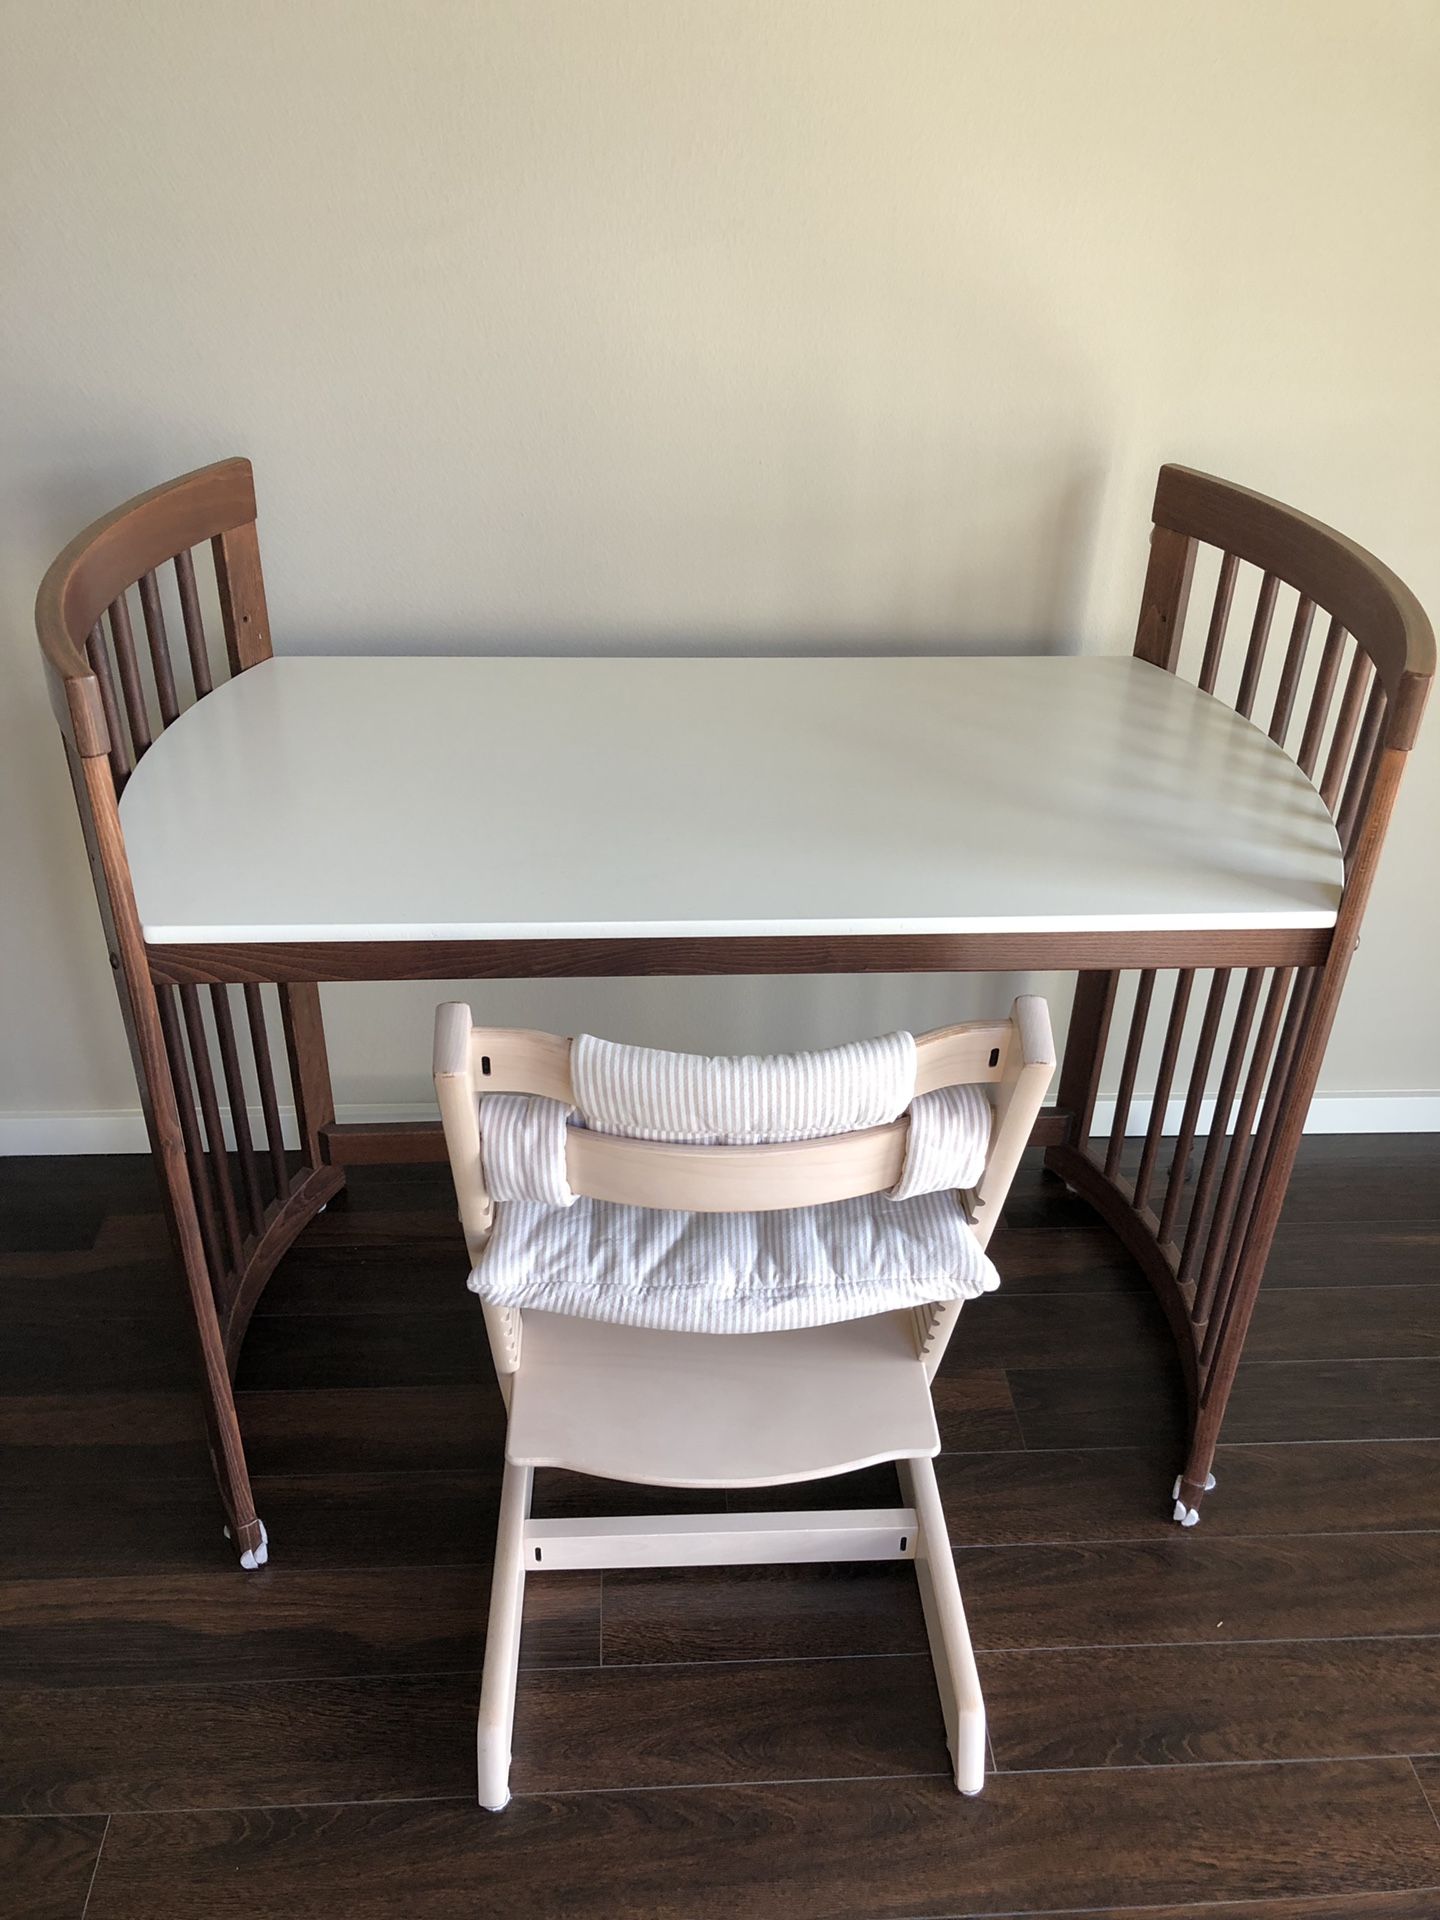 Stokke changing table / desk bundle (Tripp Trapp chair not included)